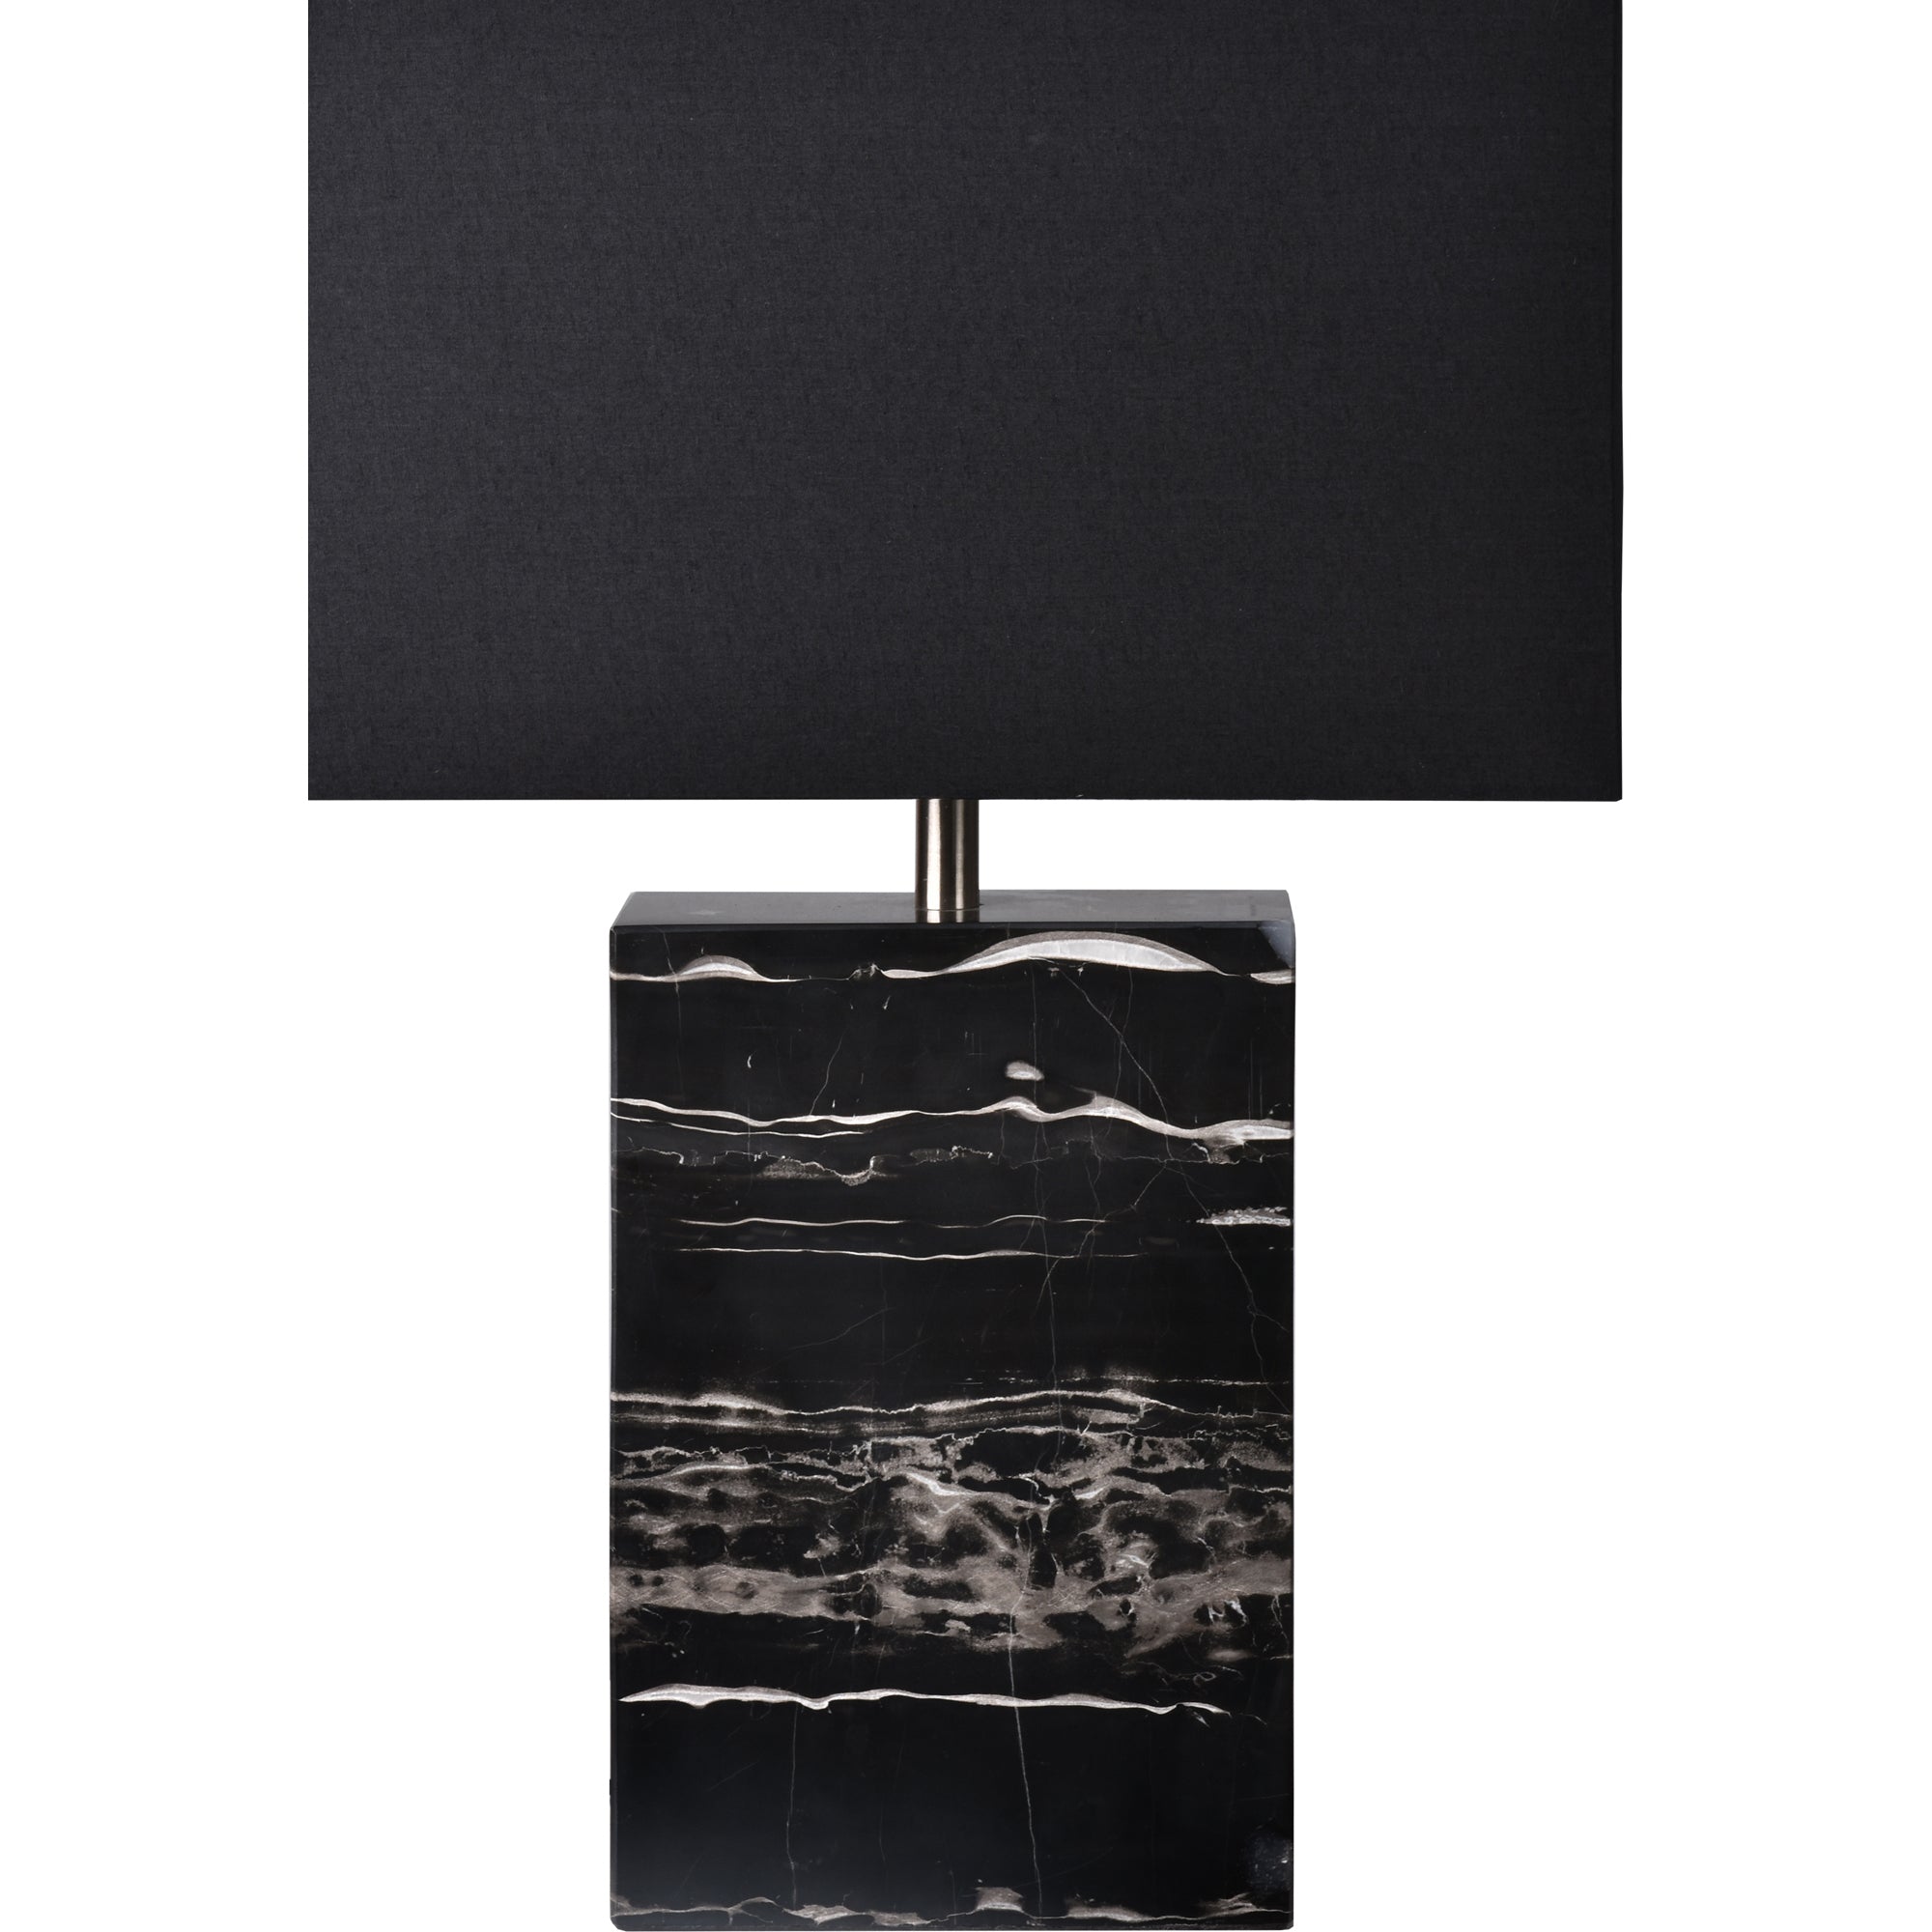 Rydell 23" Iron - Black Marble Table Lamp